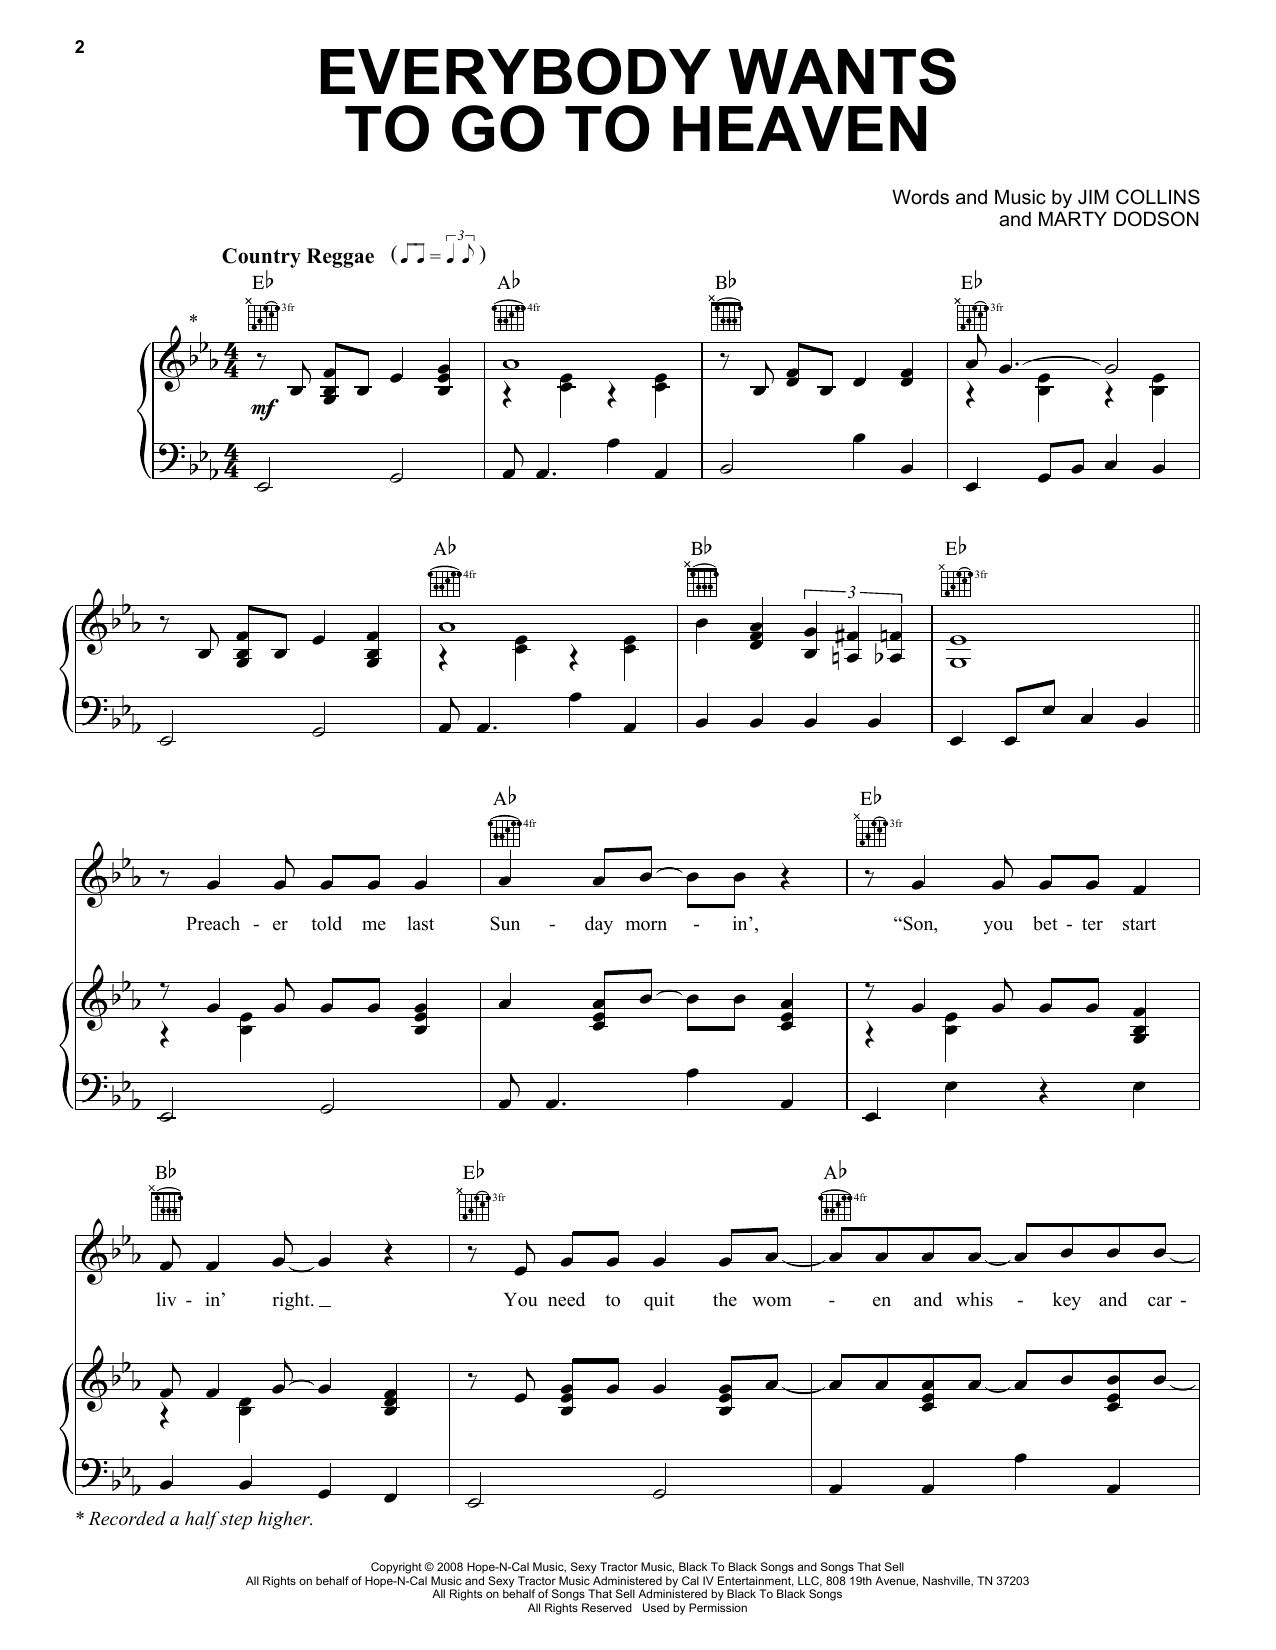 Download Kenny Chesney Everybody Wants To Go To Heaven Sheet Music